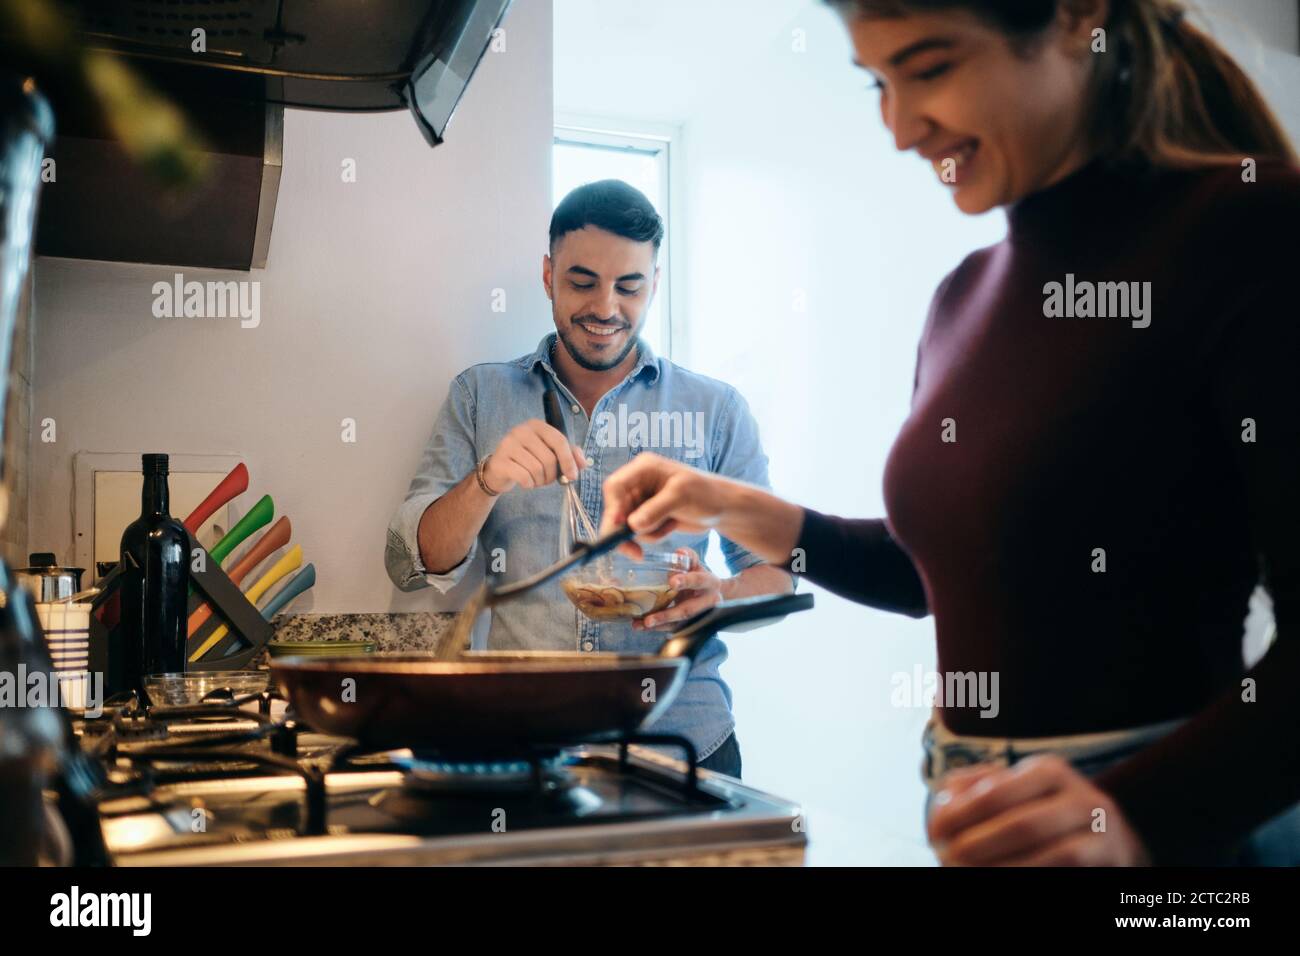 Husband And Wife Cooking Together An Omelette For Breakfast Stock Photo